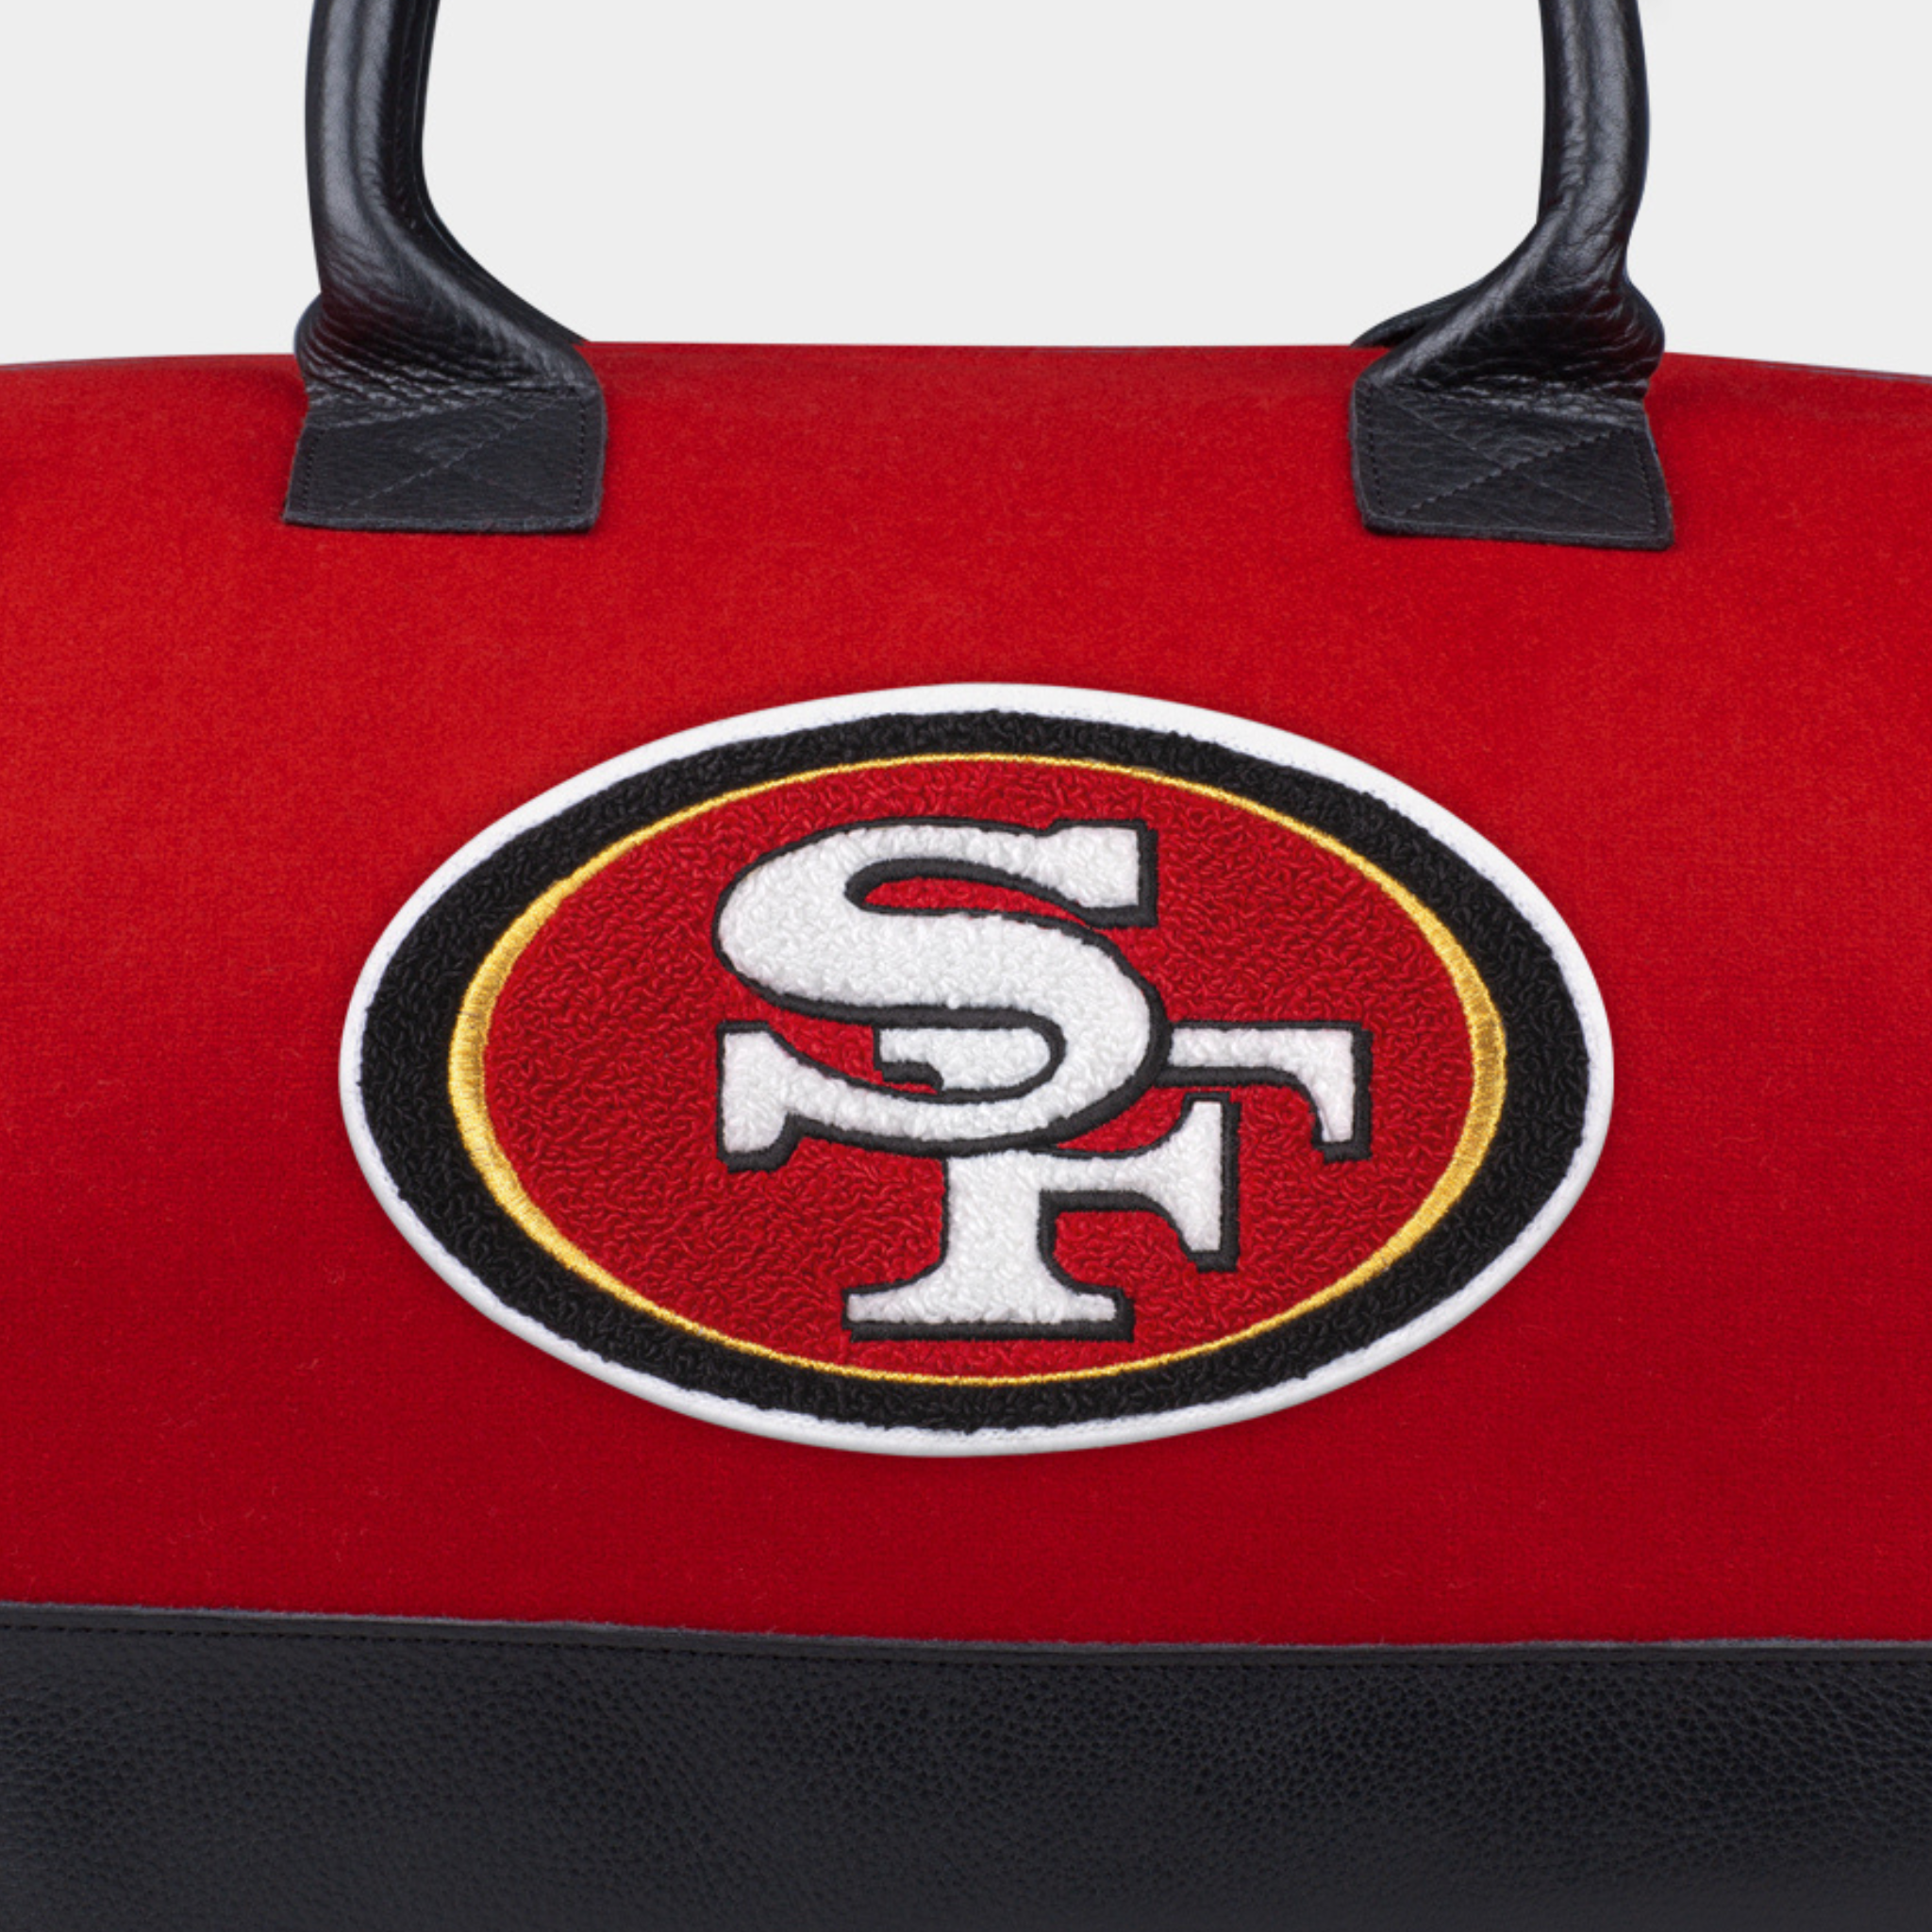 San Francisco 49ers Spirited Style Printed Collection Tote Bag